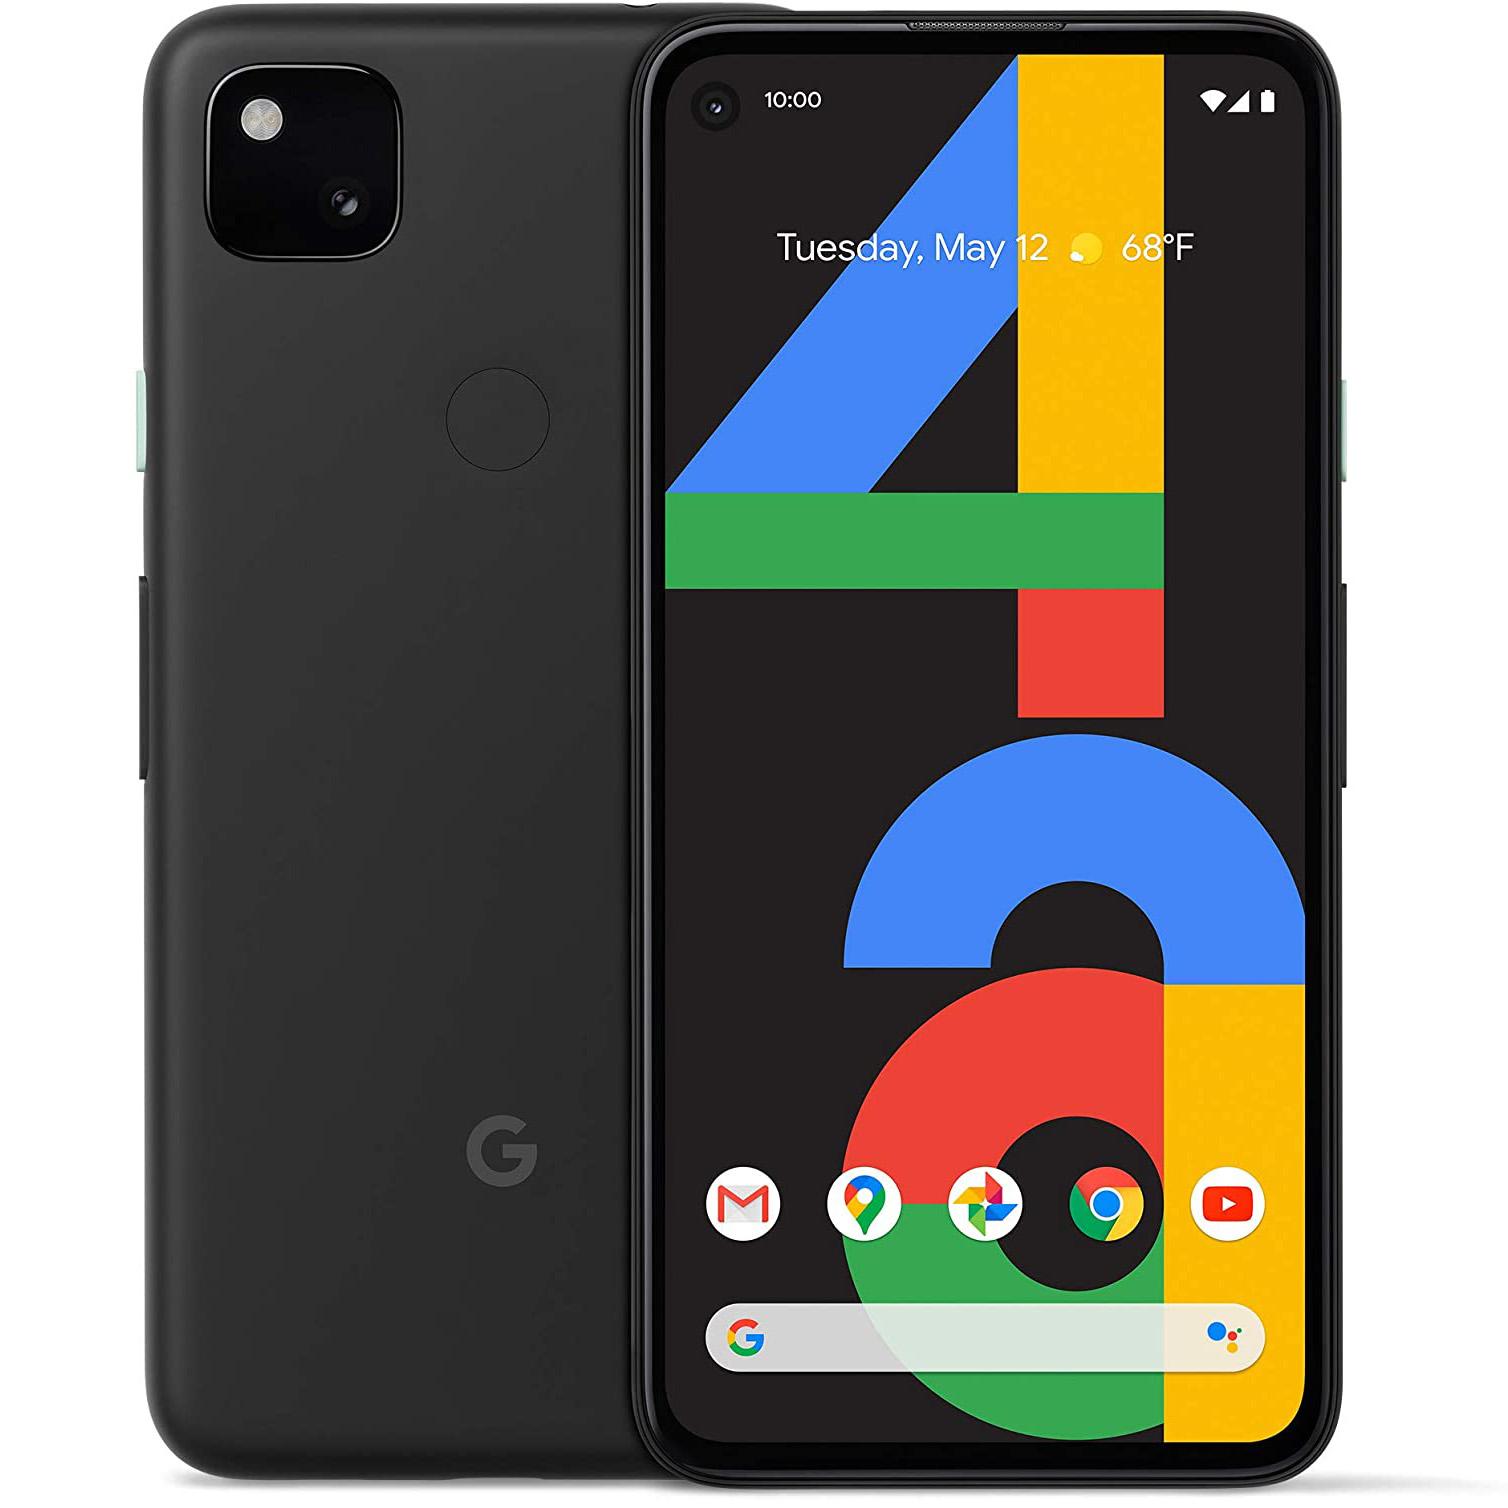 Google Pixel 4a 128GB 5G Unlocked Smartphone for $299.99 Shipped